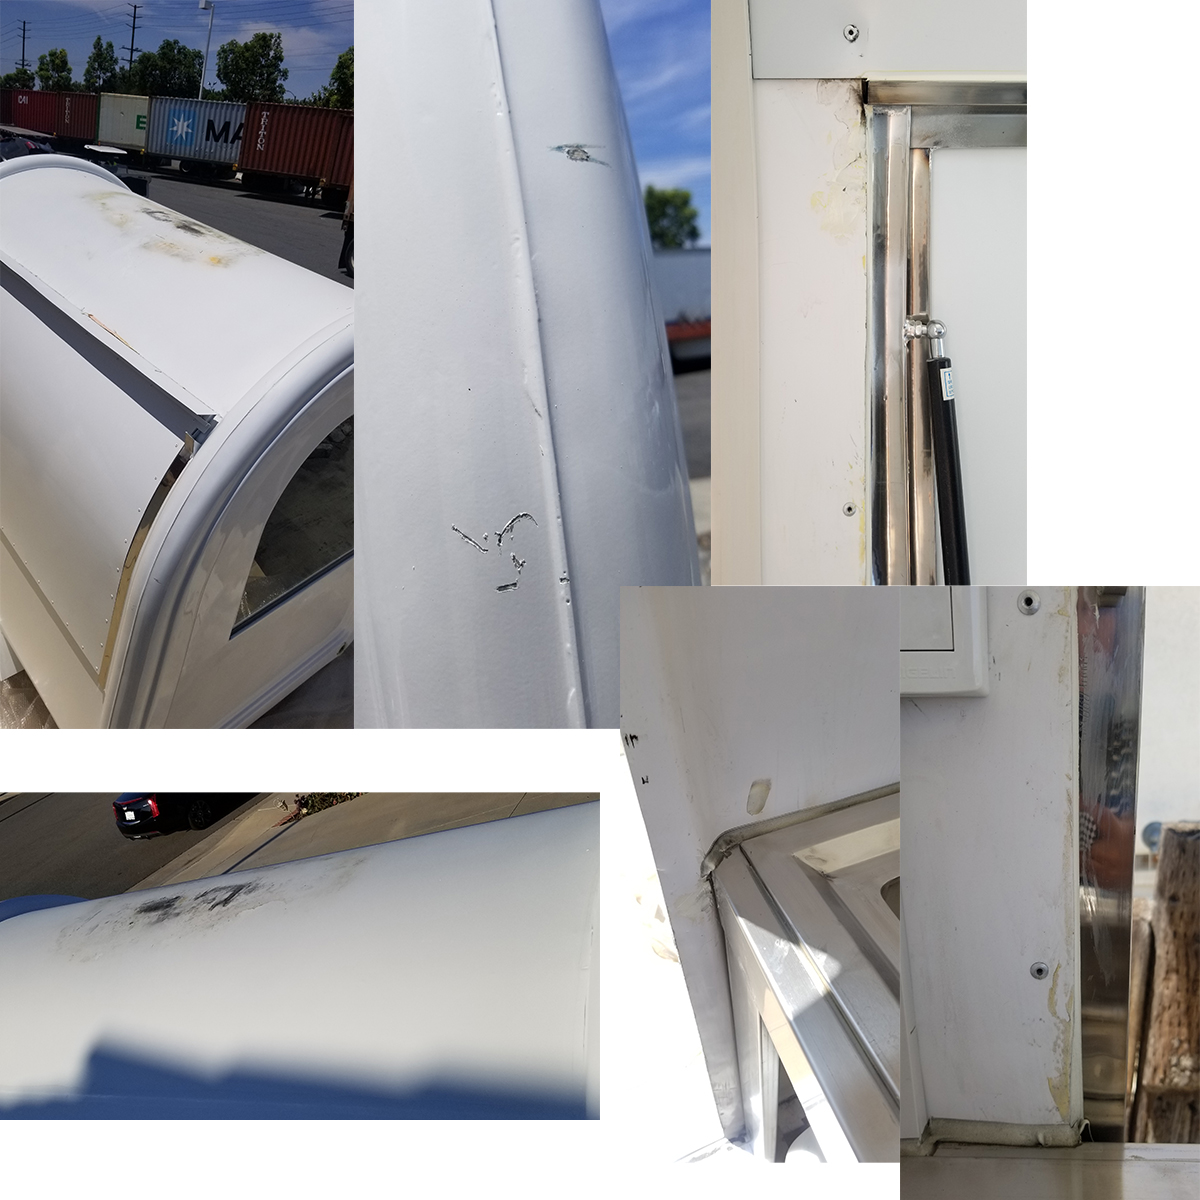 just a few photos of some of the damages.